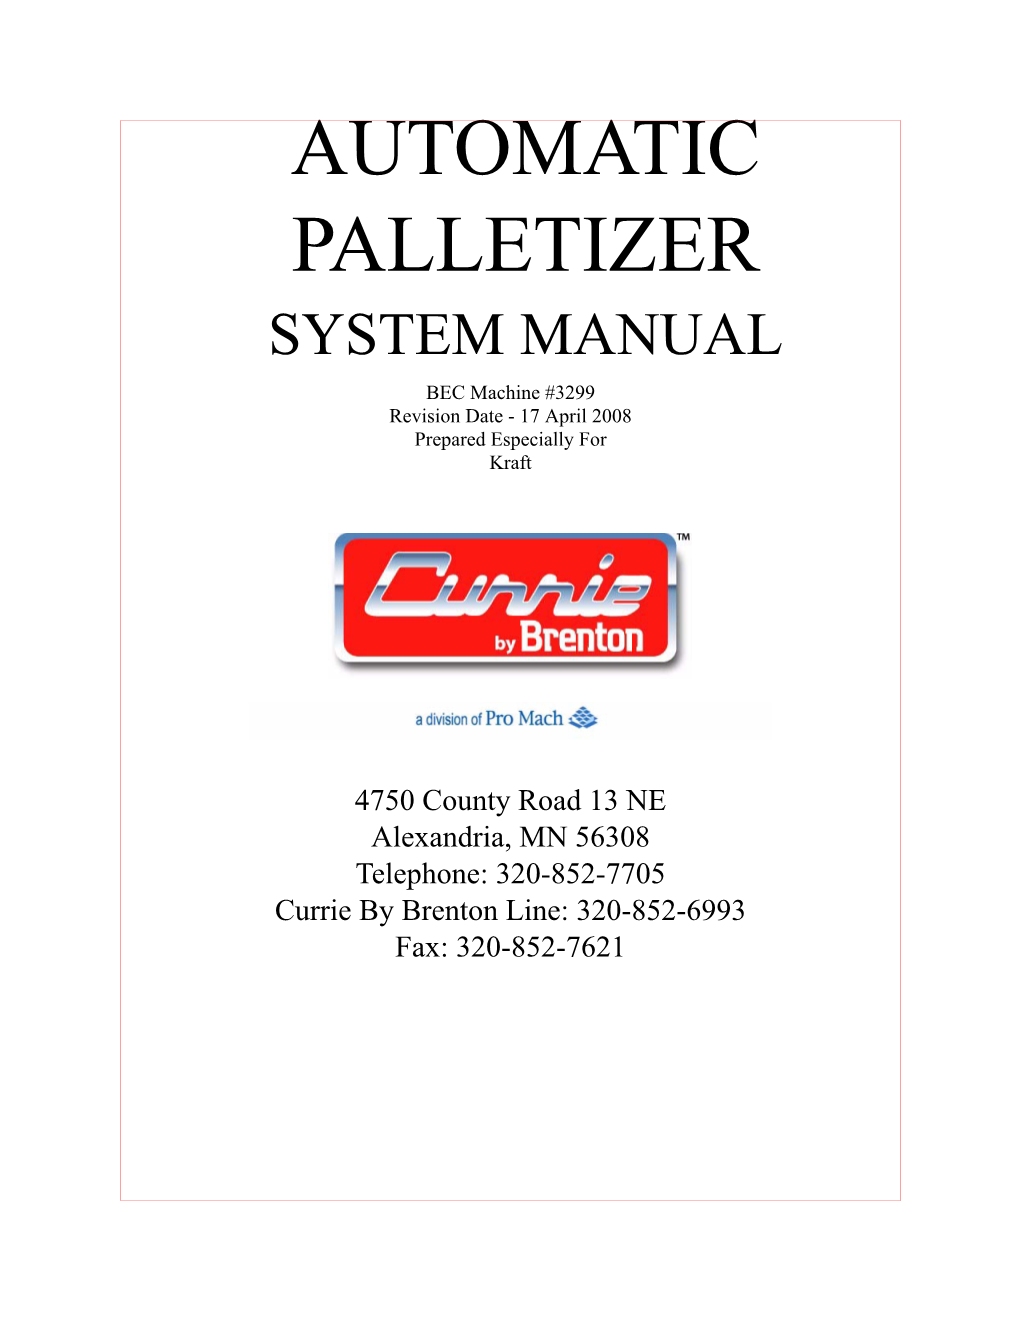 AUTOMATIC PALLETIZER SYSTEM MANUAL BEC Machine #3299 Revision Date - 17 April 2008 Prepared Especially for Kraft